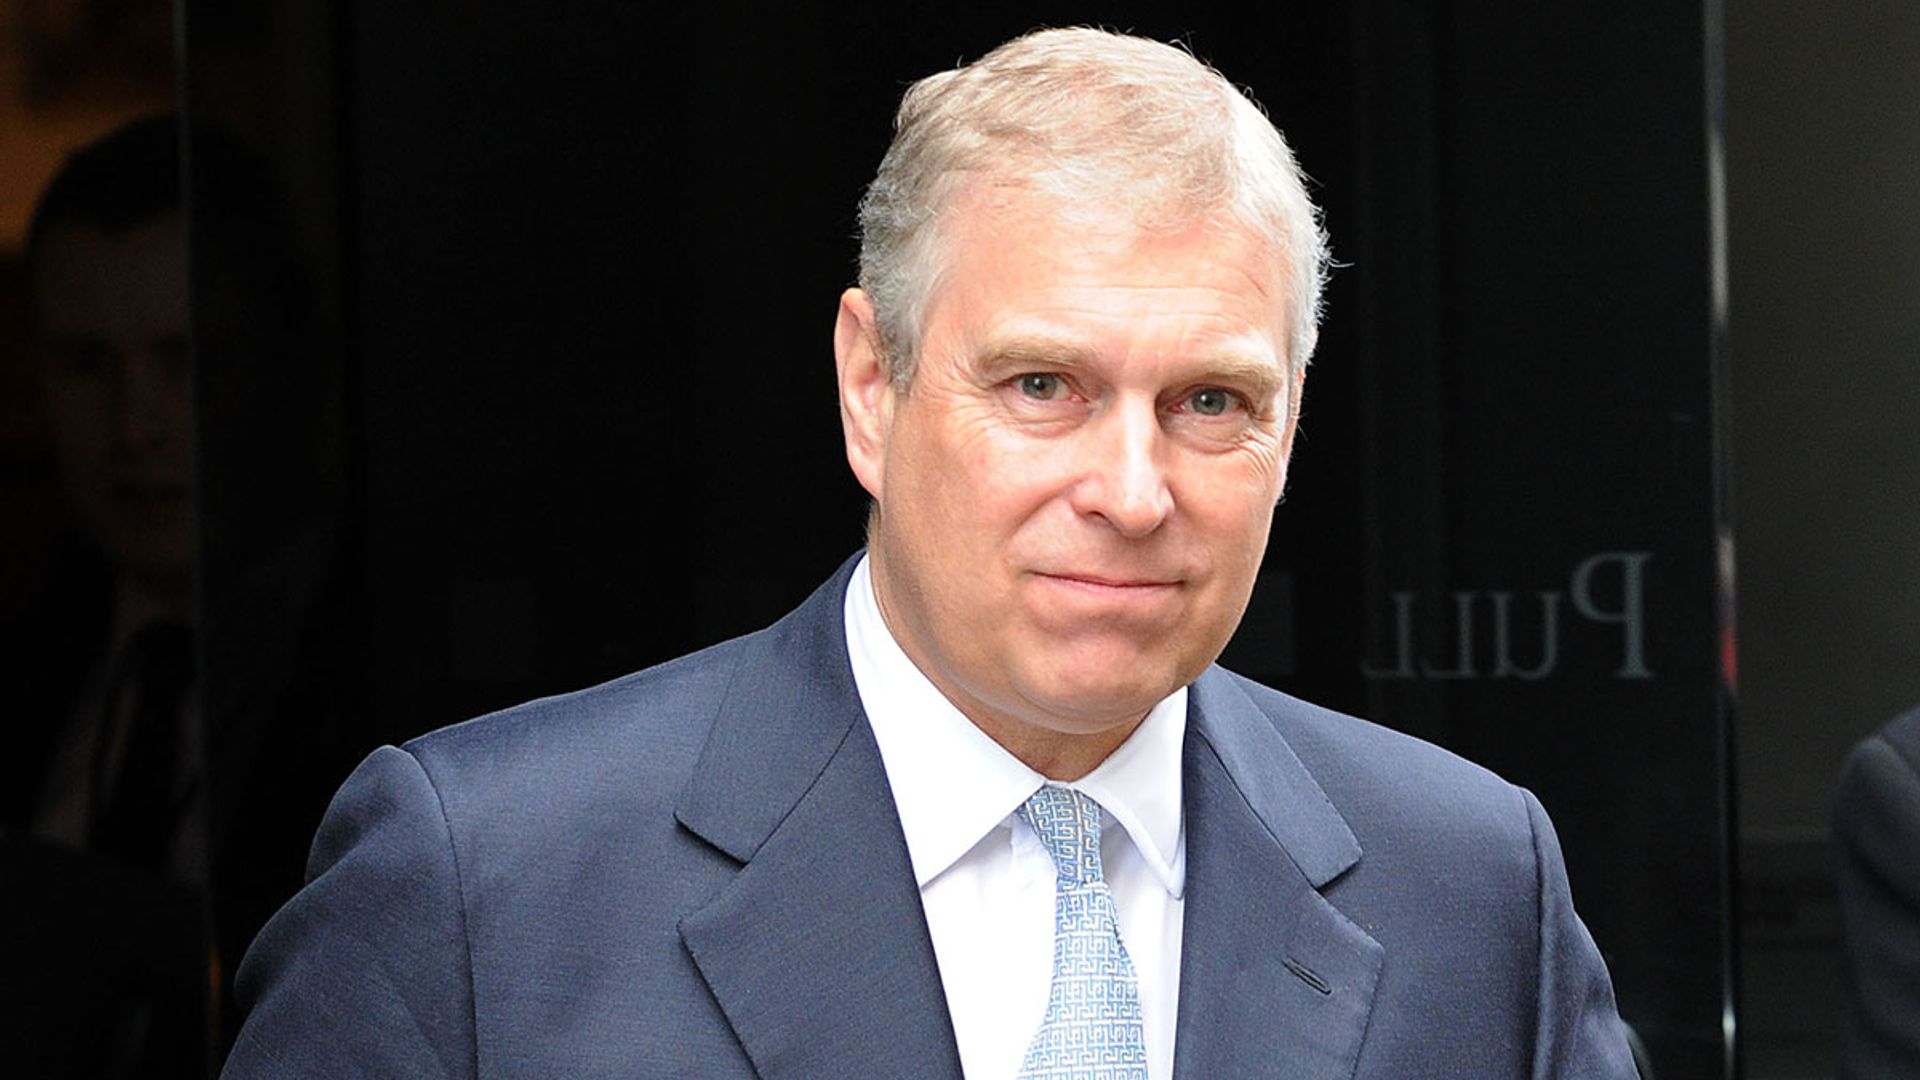 Prince Andrew to attend Prince Philip memorial alongside the Queen and other royals